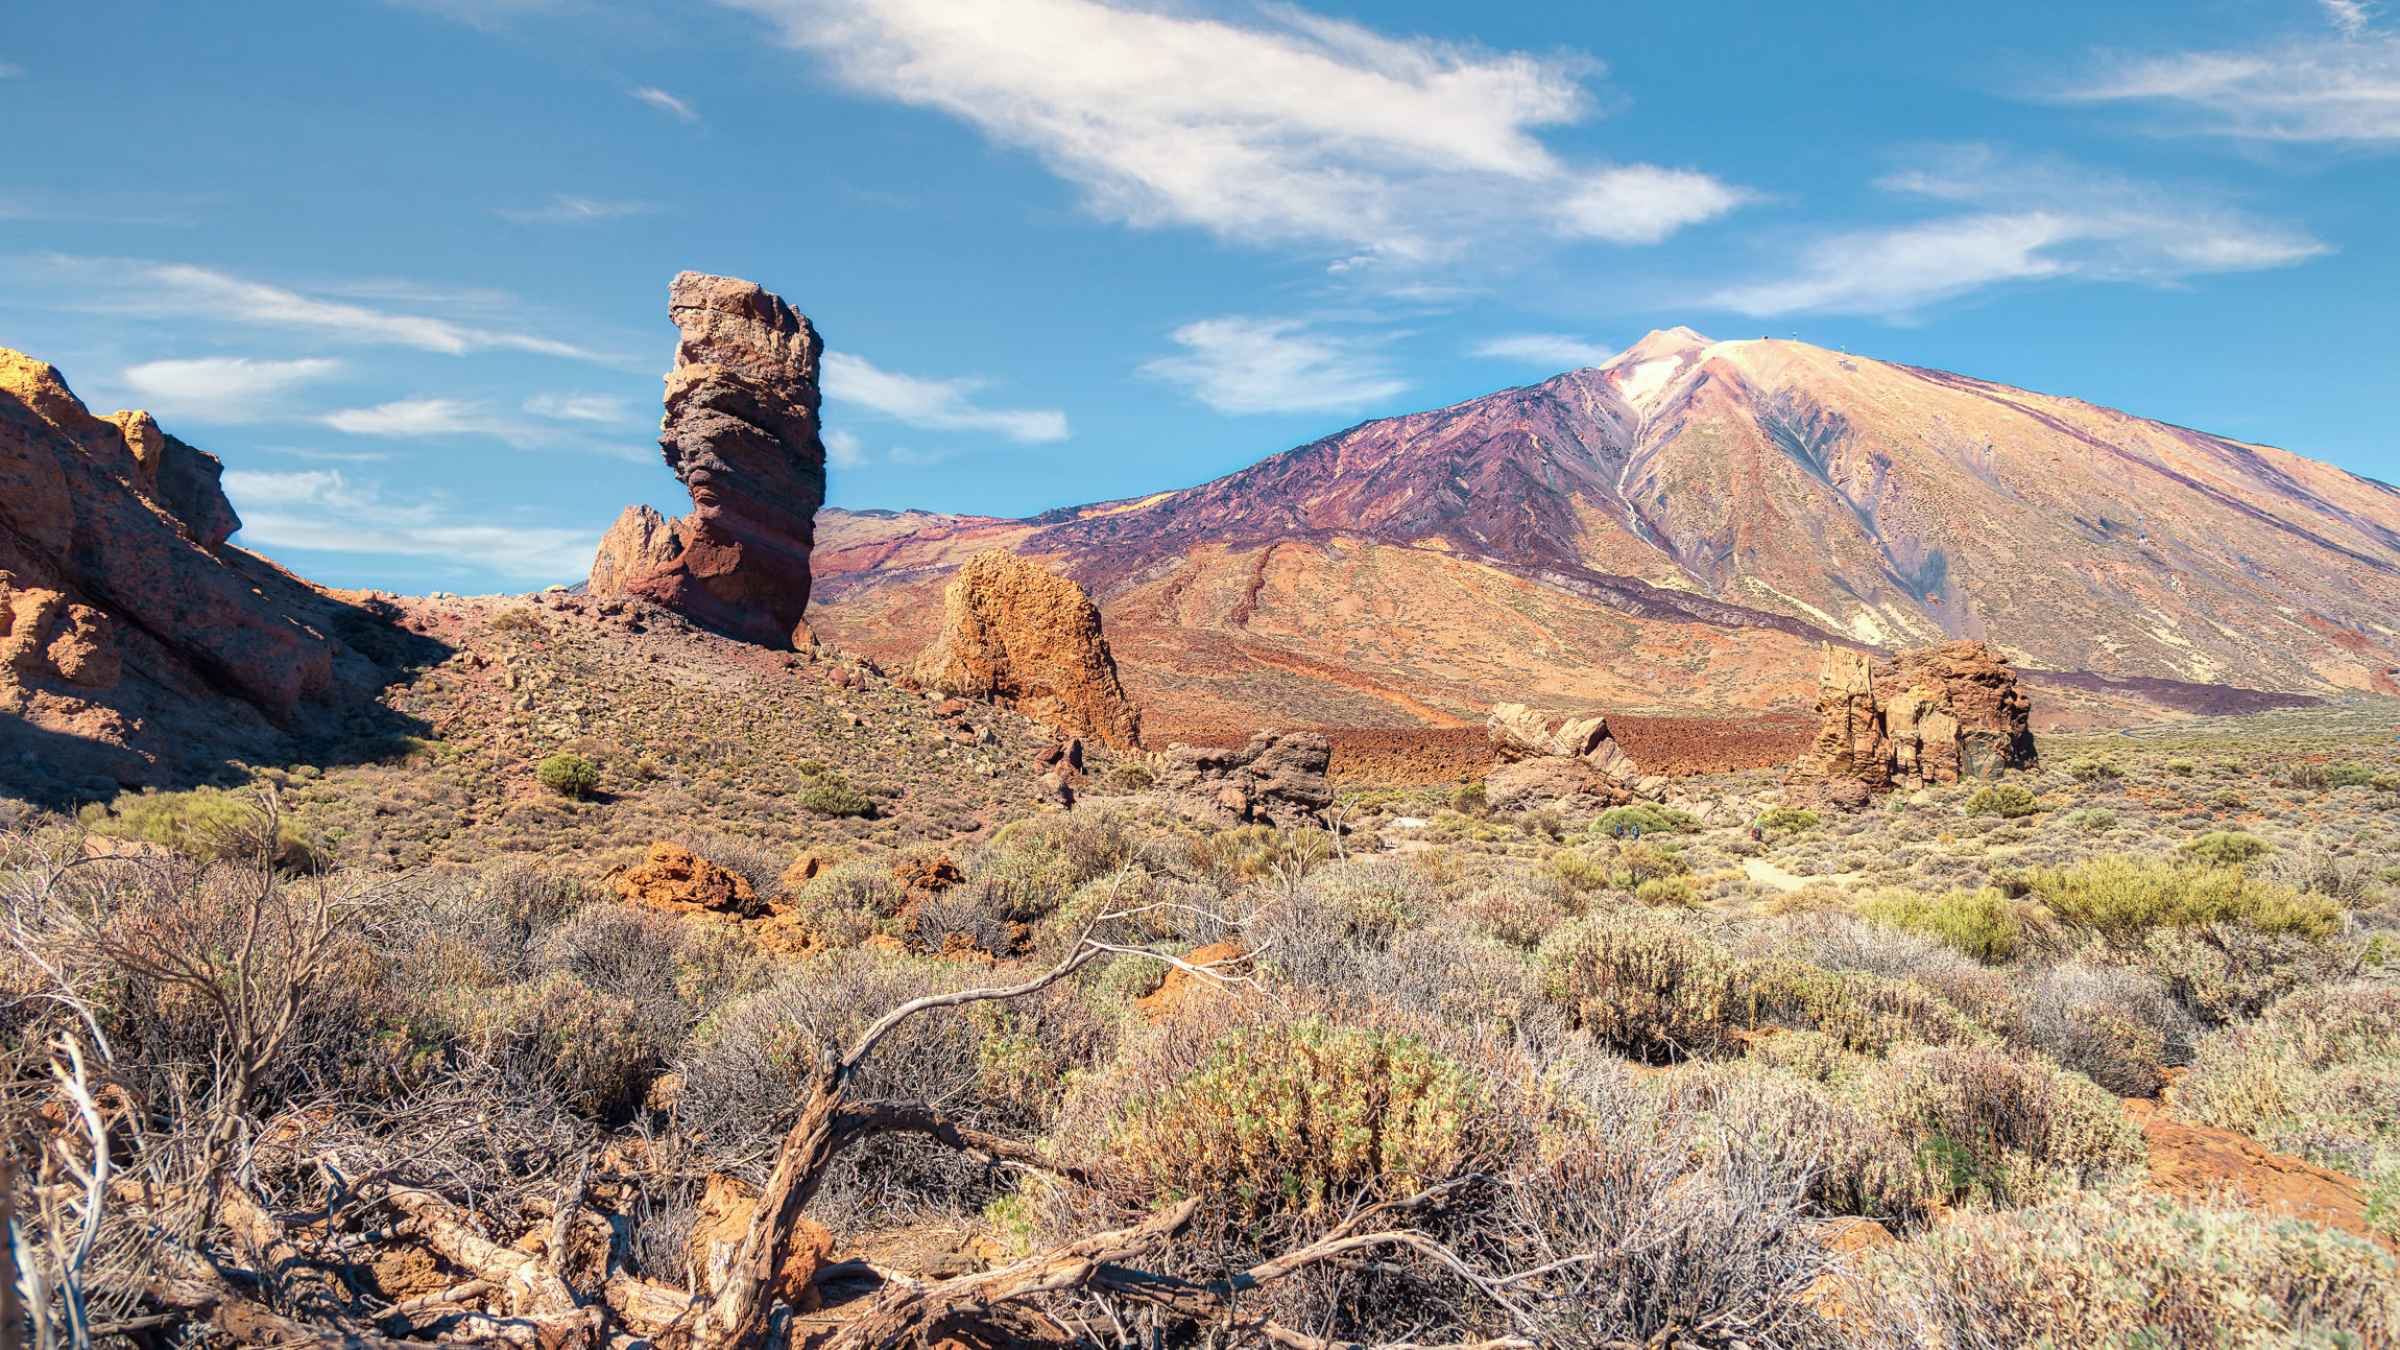 Teide National Park, Tenerife - Book Tickets & Tours | GetYourGuide